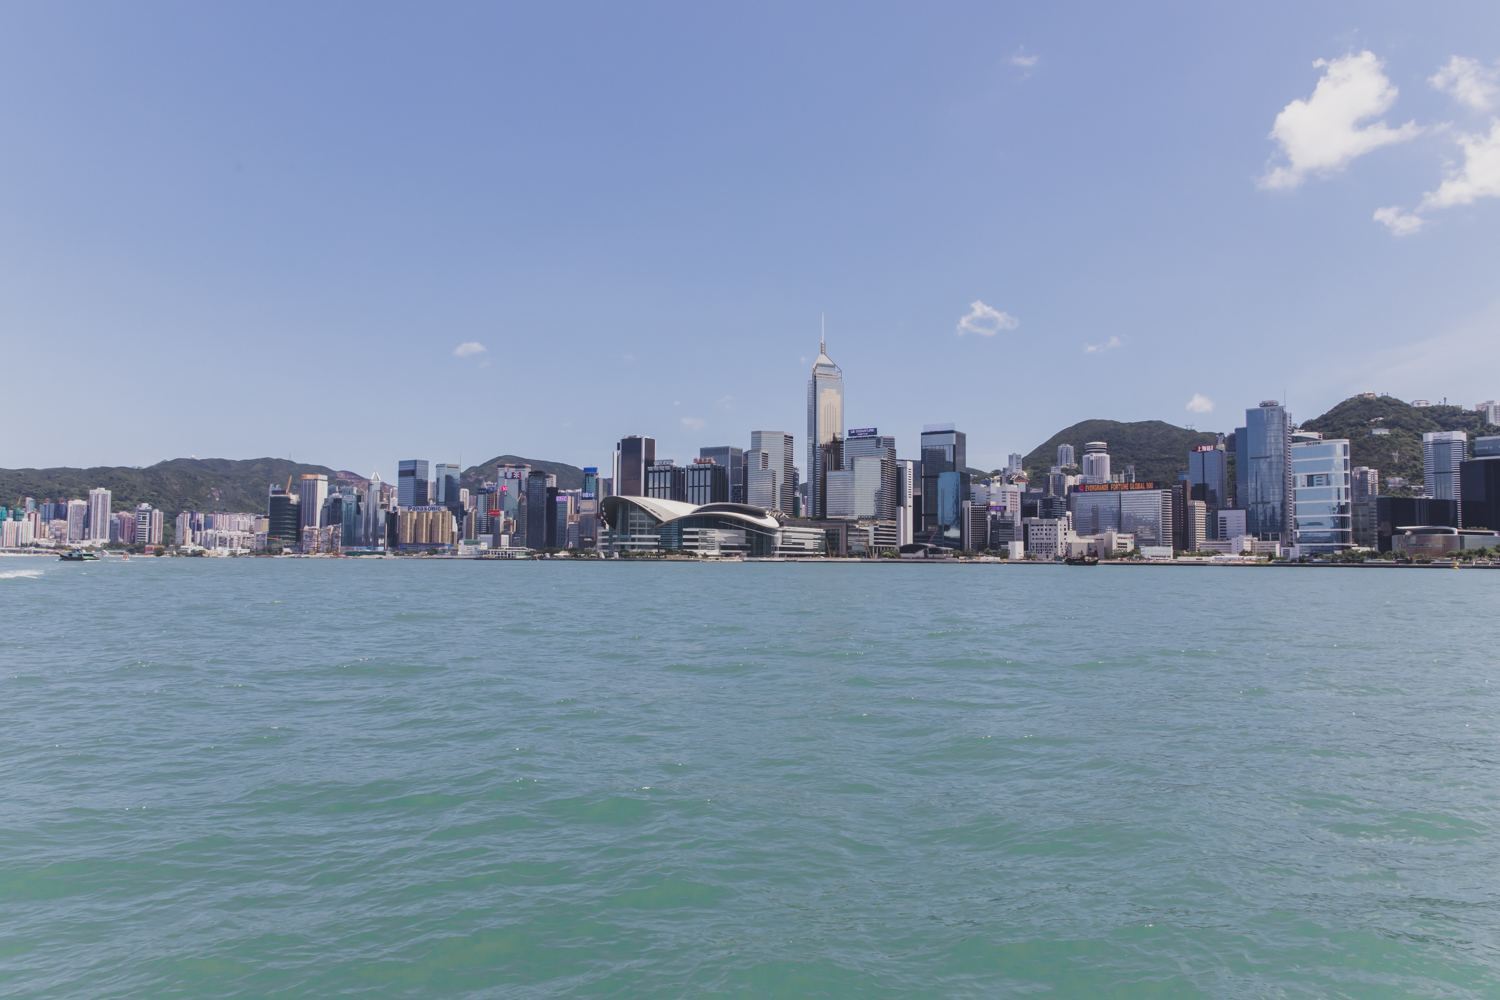 Hong Kong Island from Star Ferry. I recommend taking Star Ferry as much as possible because they are VERY cheap and run every 30 minutes.